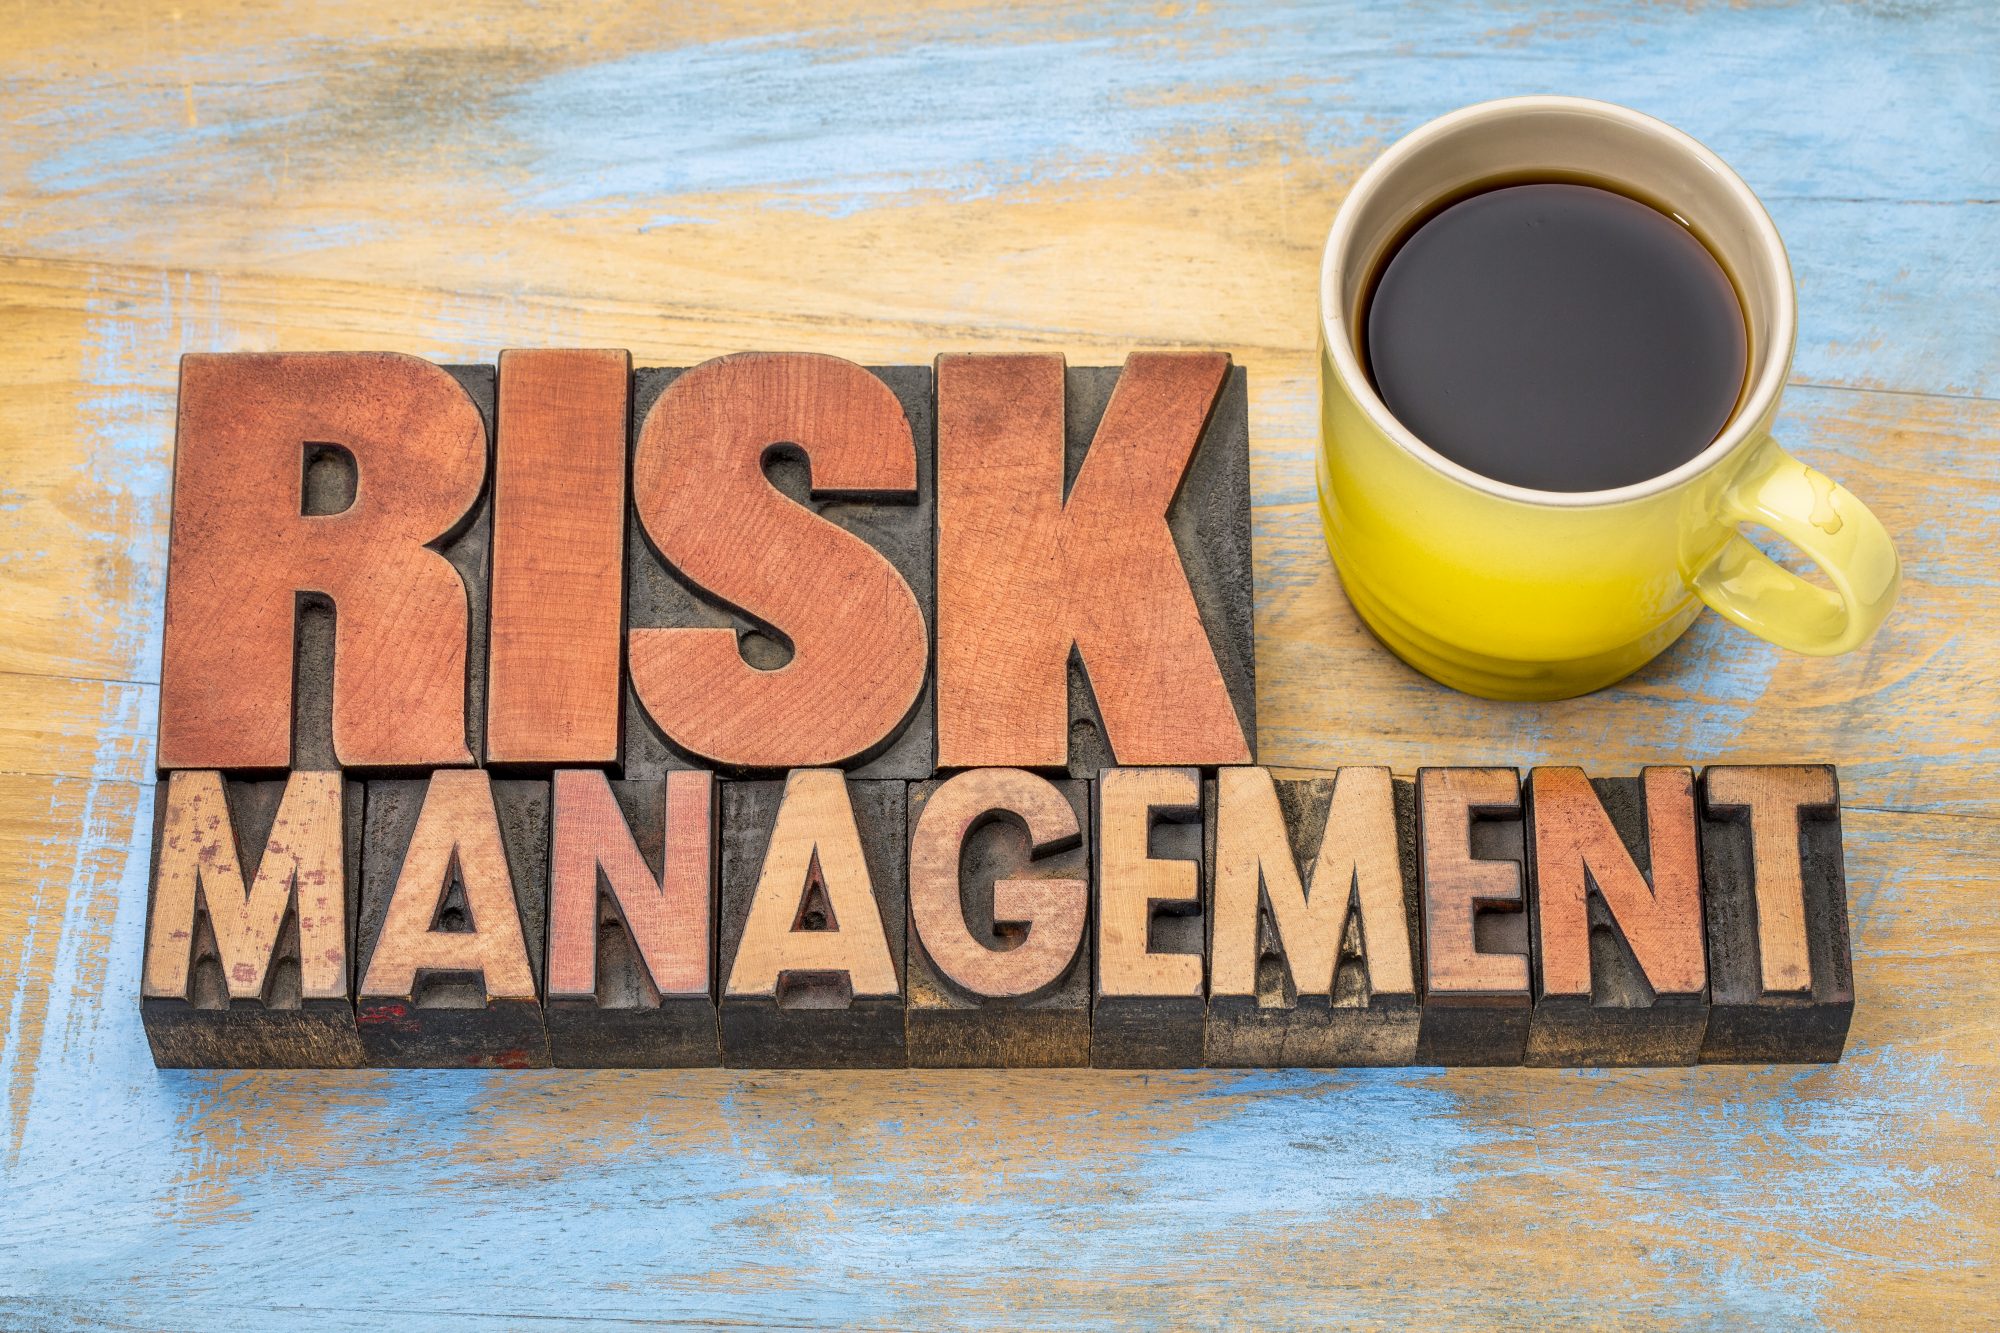 Taking a broader view of construction risk management